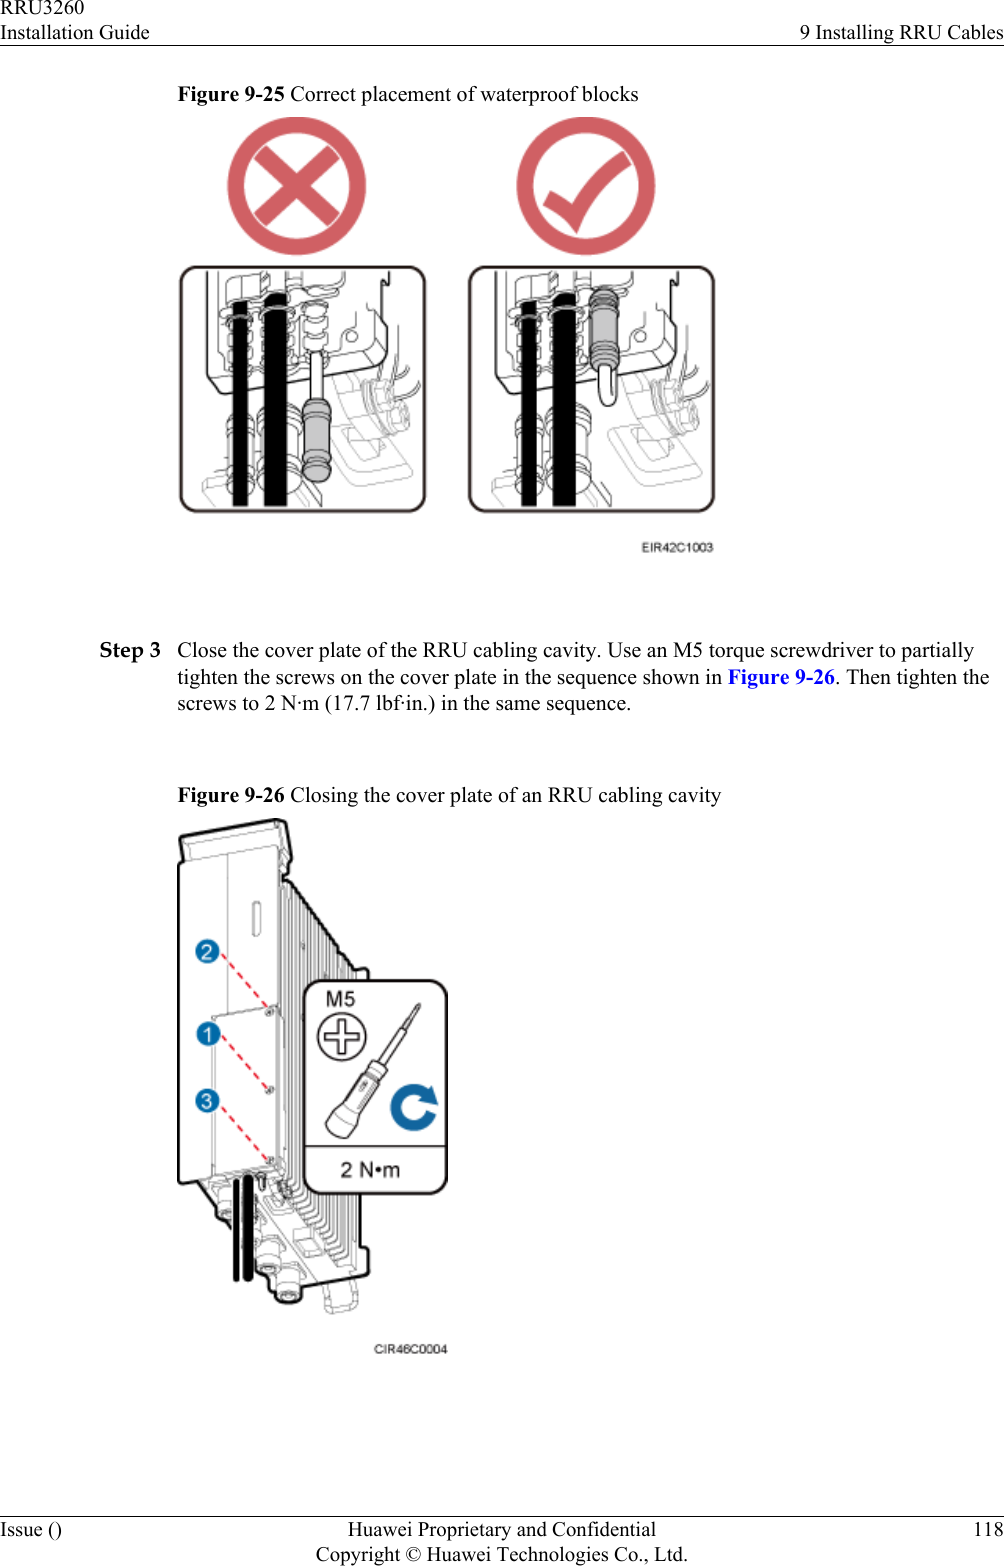 Figure 9-25 Correct placement of waterproof blocks Step 3 Close the cover plate of the RRU cabling cavity. Use an M5 torque screwdriver to partiallytighten the screws on the cover plate in the sequence shown in Figure 9-26. Then tighten thescrews to 2 N·m (17.7 lbf·in.) in the same sequence.Figure 9-26 Closing the cover plate of an RRU cabling cavity RRU3260Installation Guide 9 Installing RRU CablesIssue () Huawei Proprietary and ConfidentialCopyright © Huawei Technologies Co., Ltd.118